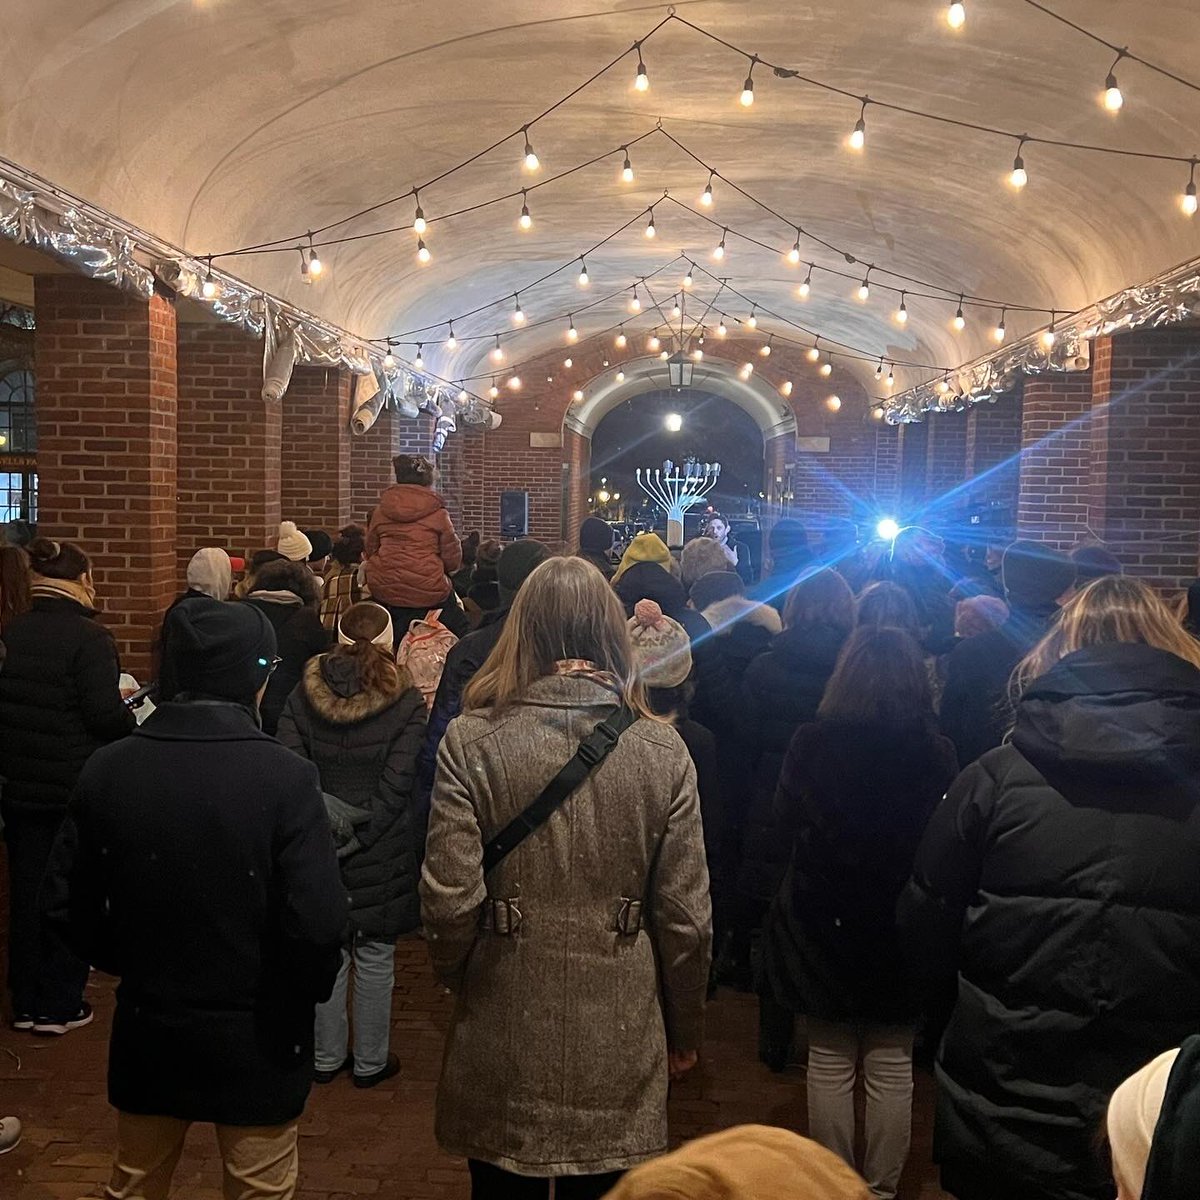 We had a great evening Monday night at the @southstreetphl Menorah Lighting. Great community event! Happy Hanukkah to all who celebrate! 

#HappyHanukkah #PhillyPd #PhillyPolice #Community #CommunityPolicing